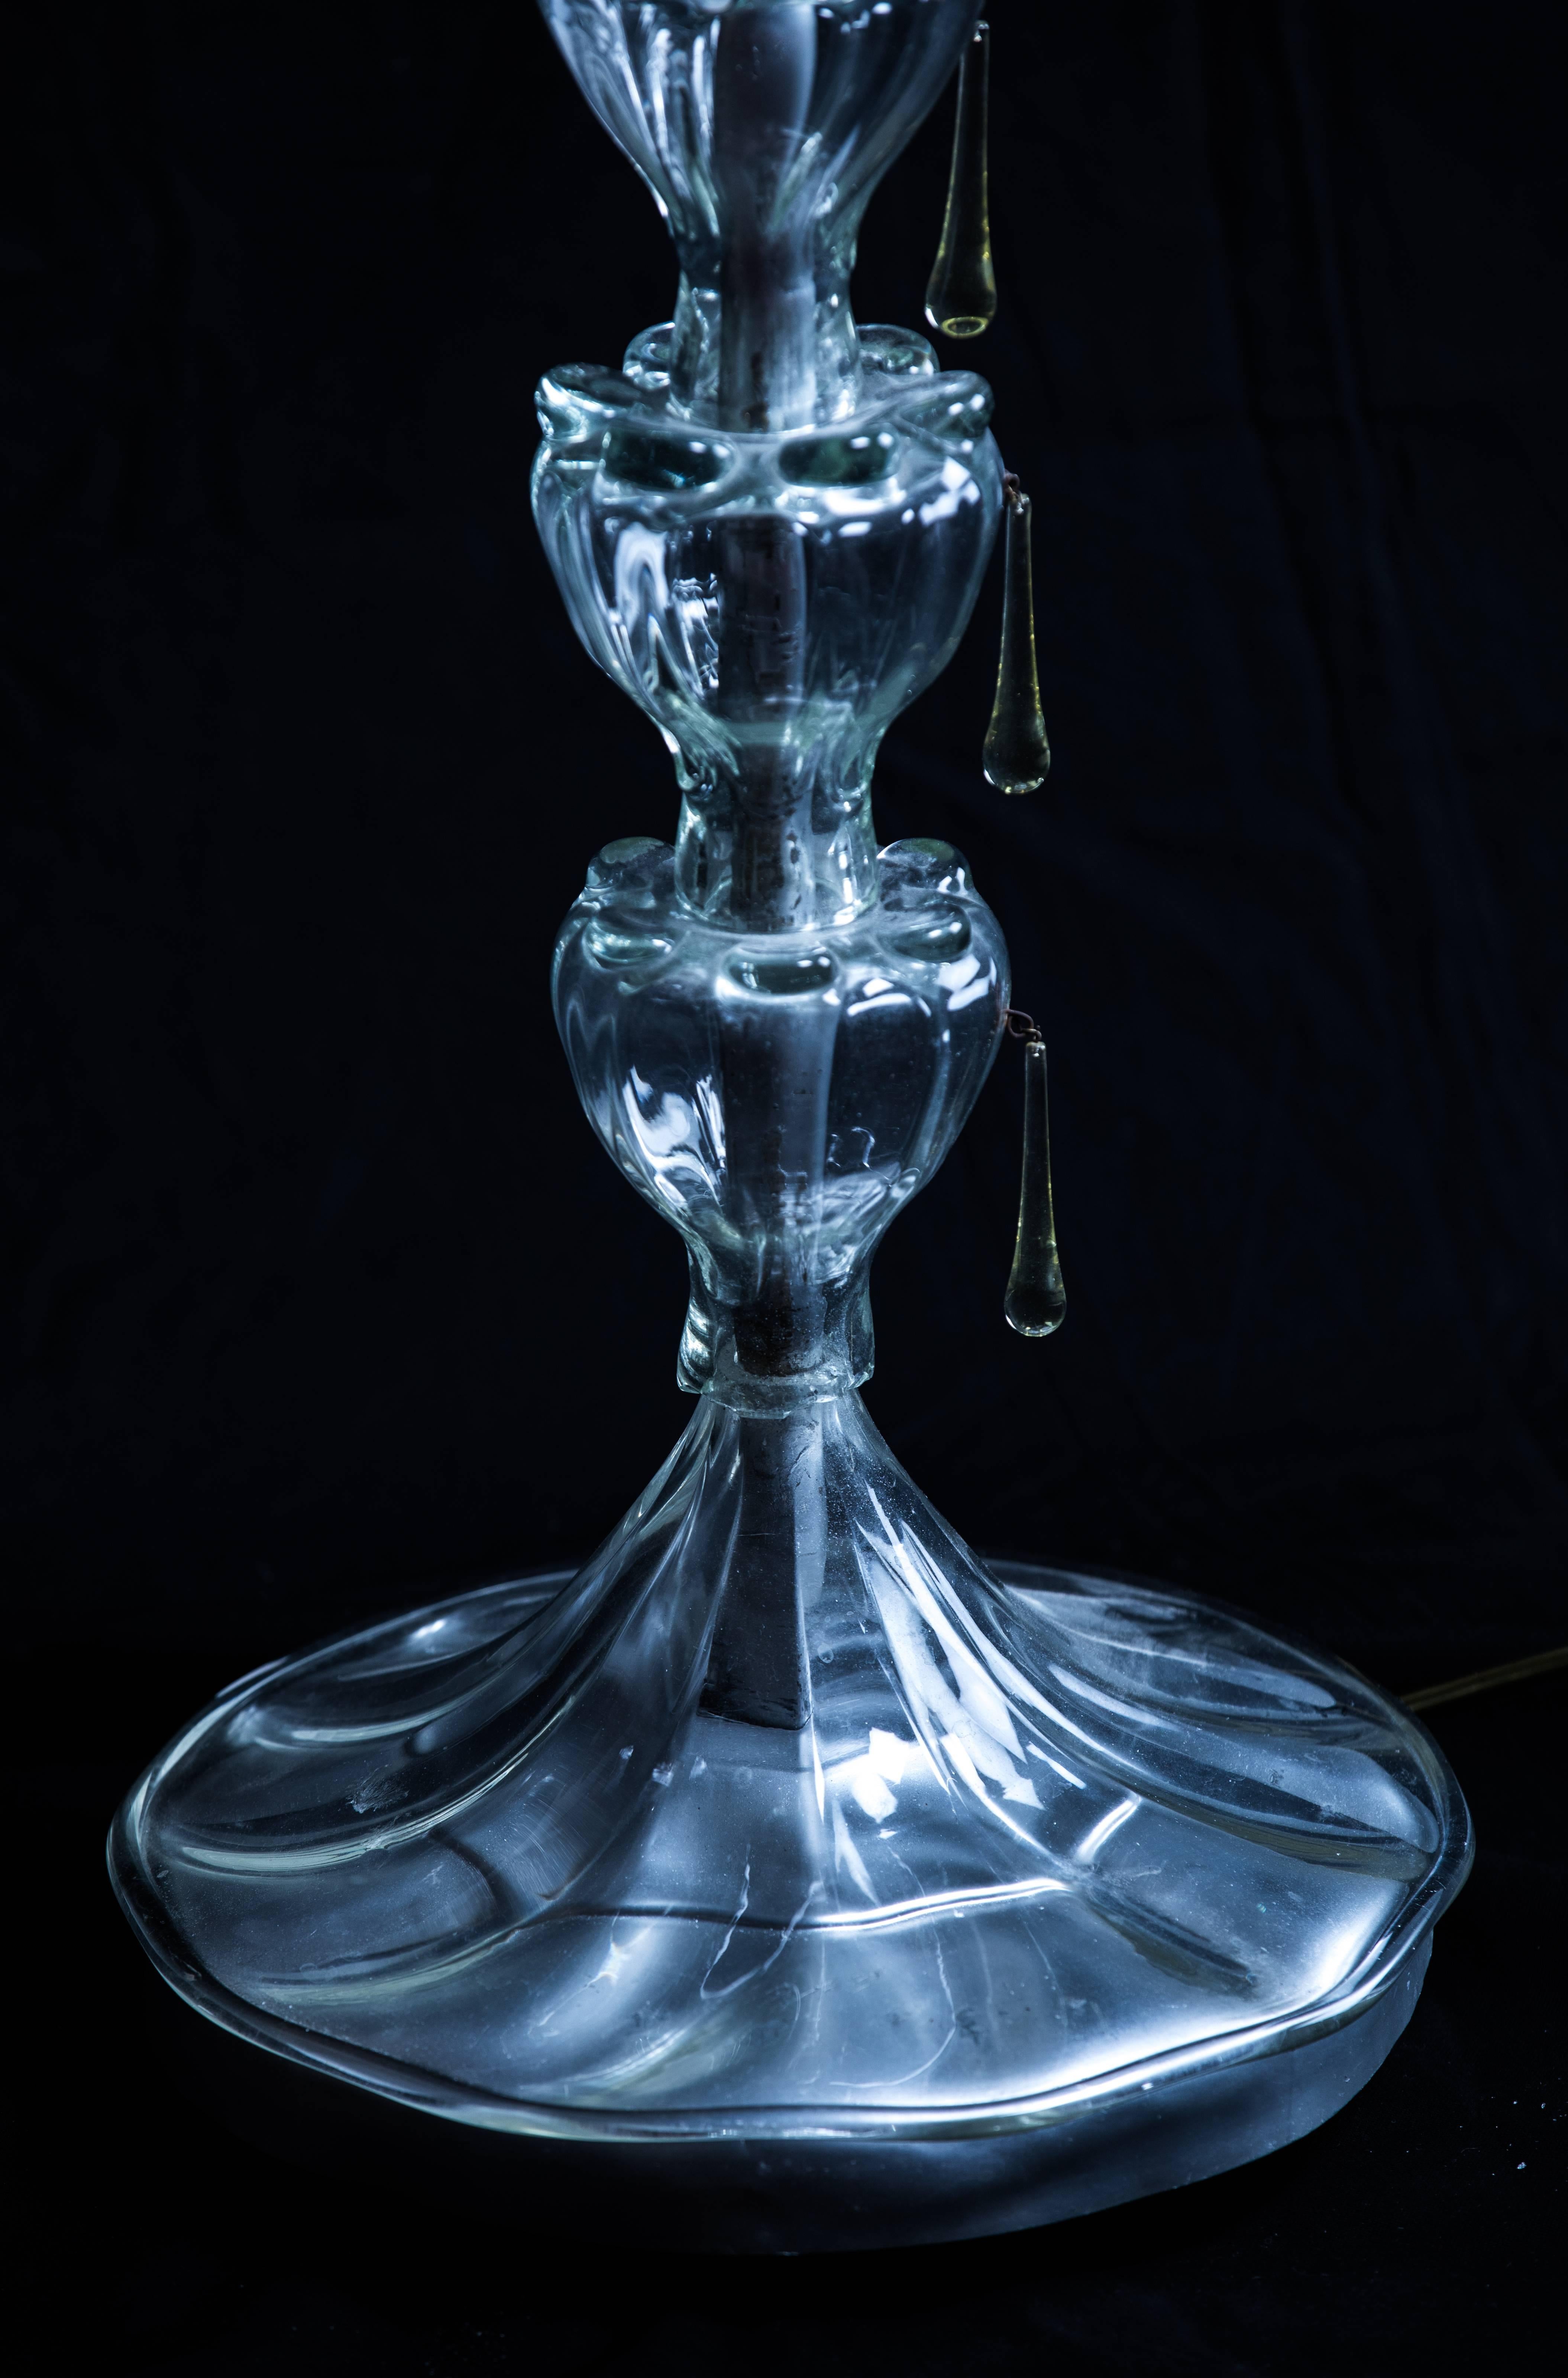 Italian vintage handblown Murano glass floor lamp with transparent details, glass drops next to each part of the lamp stem, on glass covered metal basement, late 20th century.